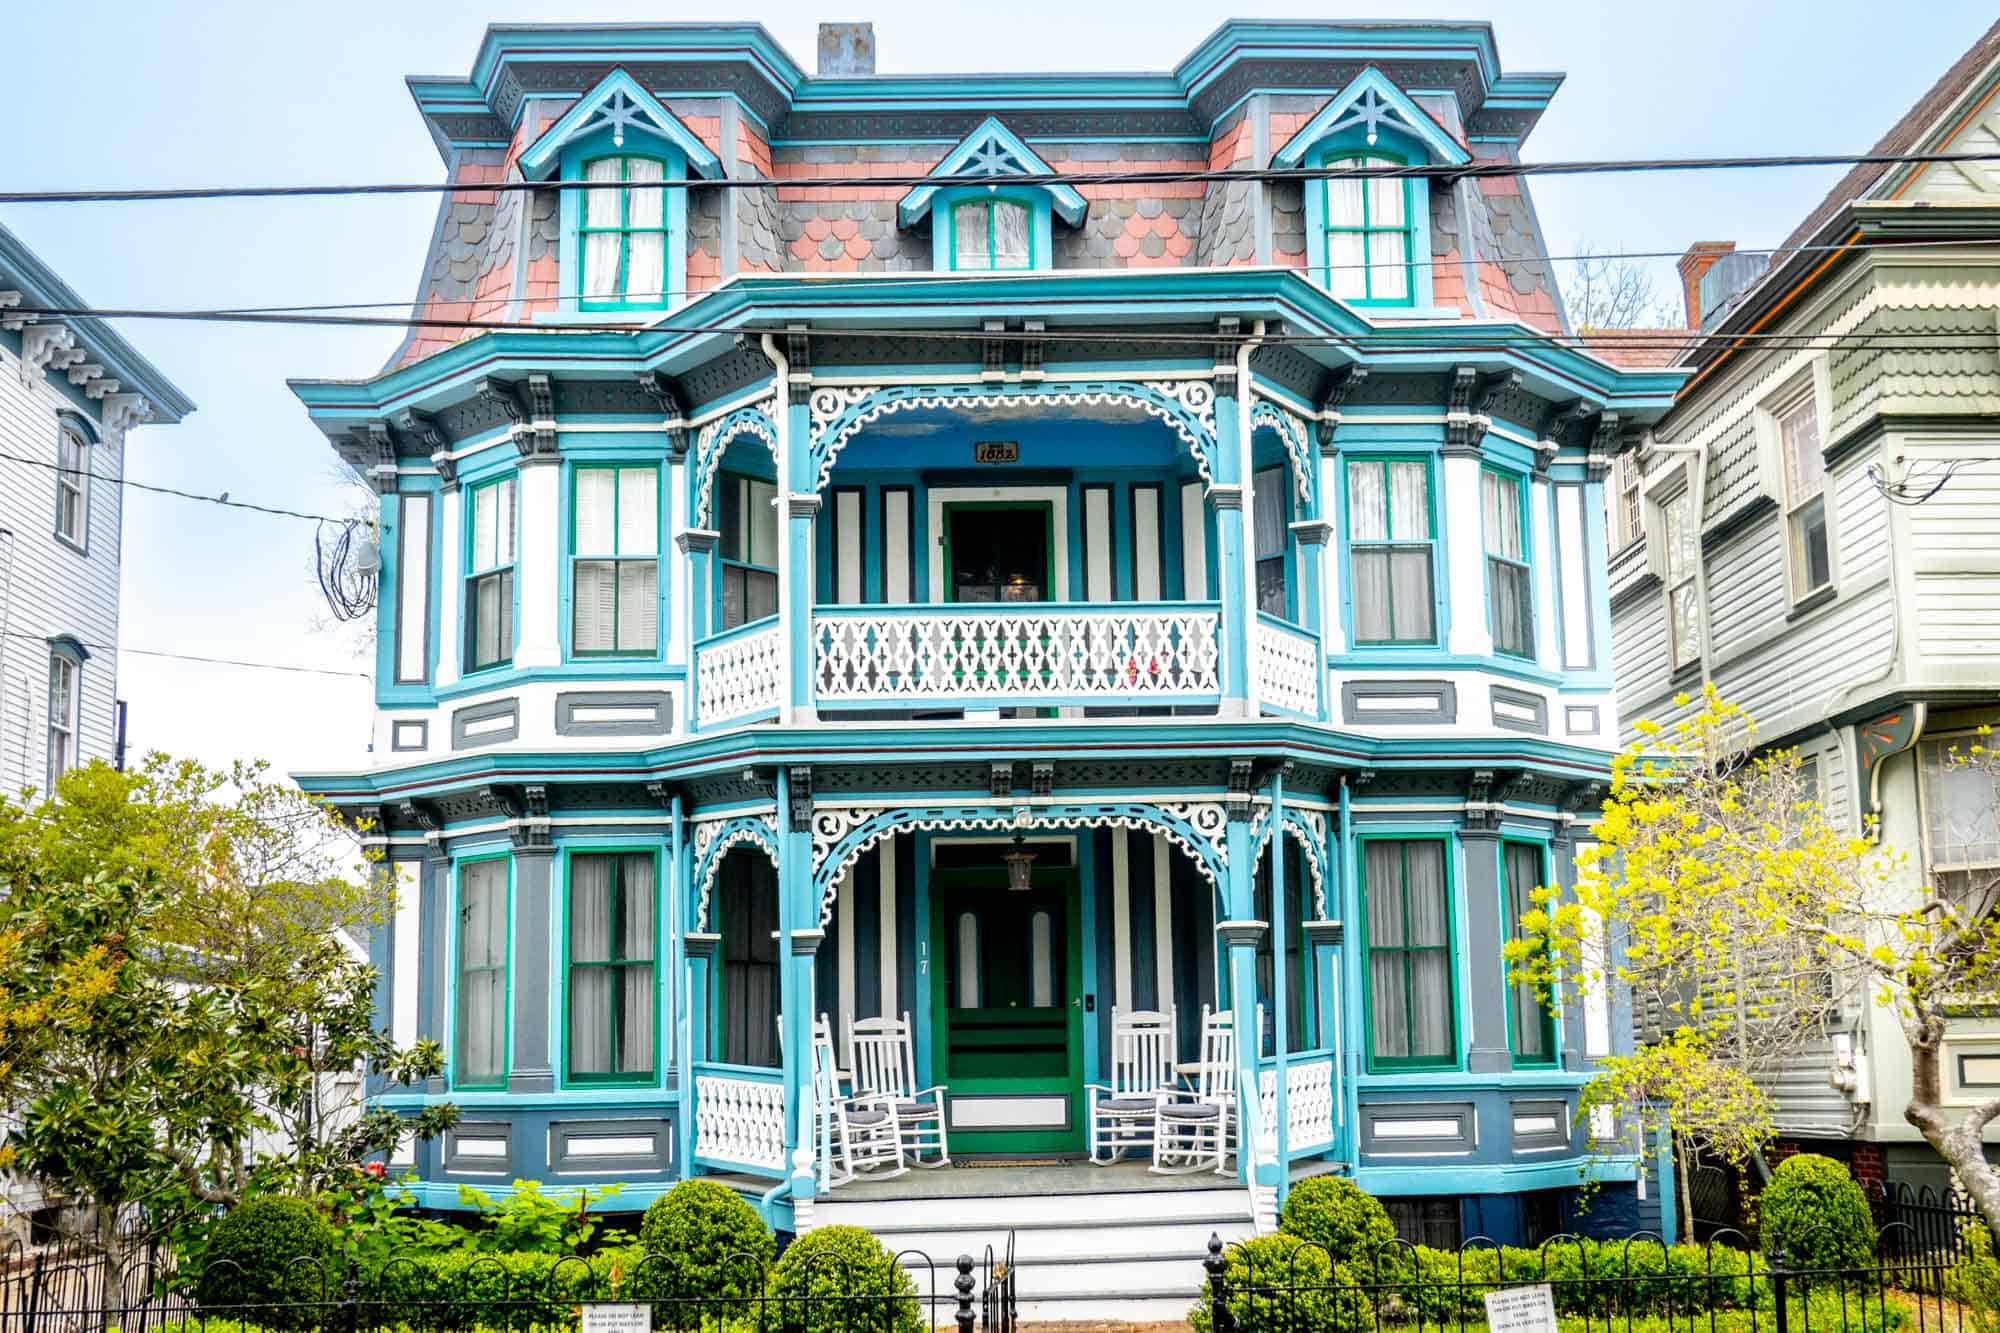 Three-story Victorian home with turquoise decorations